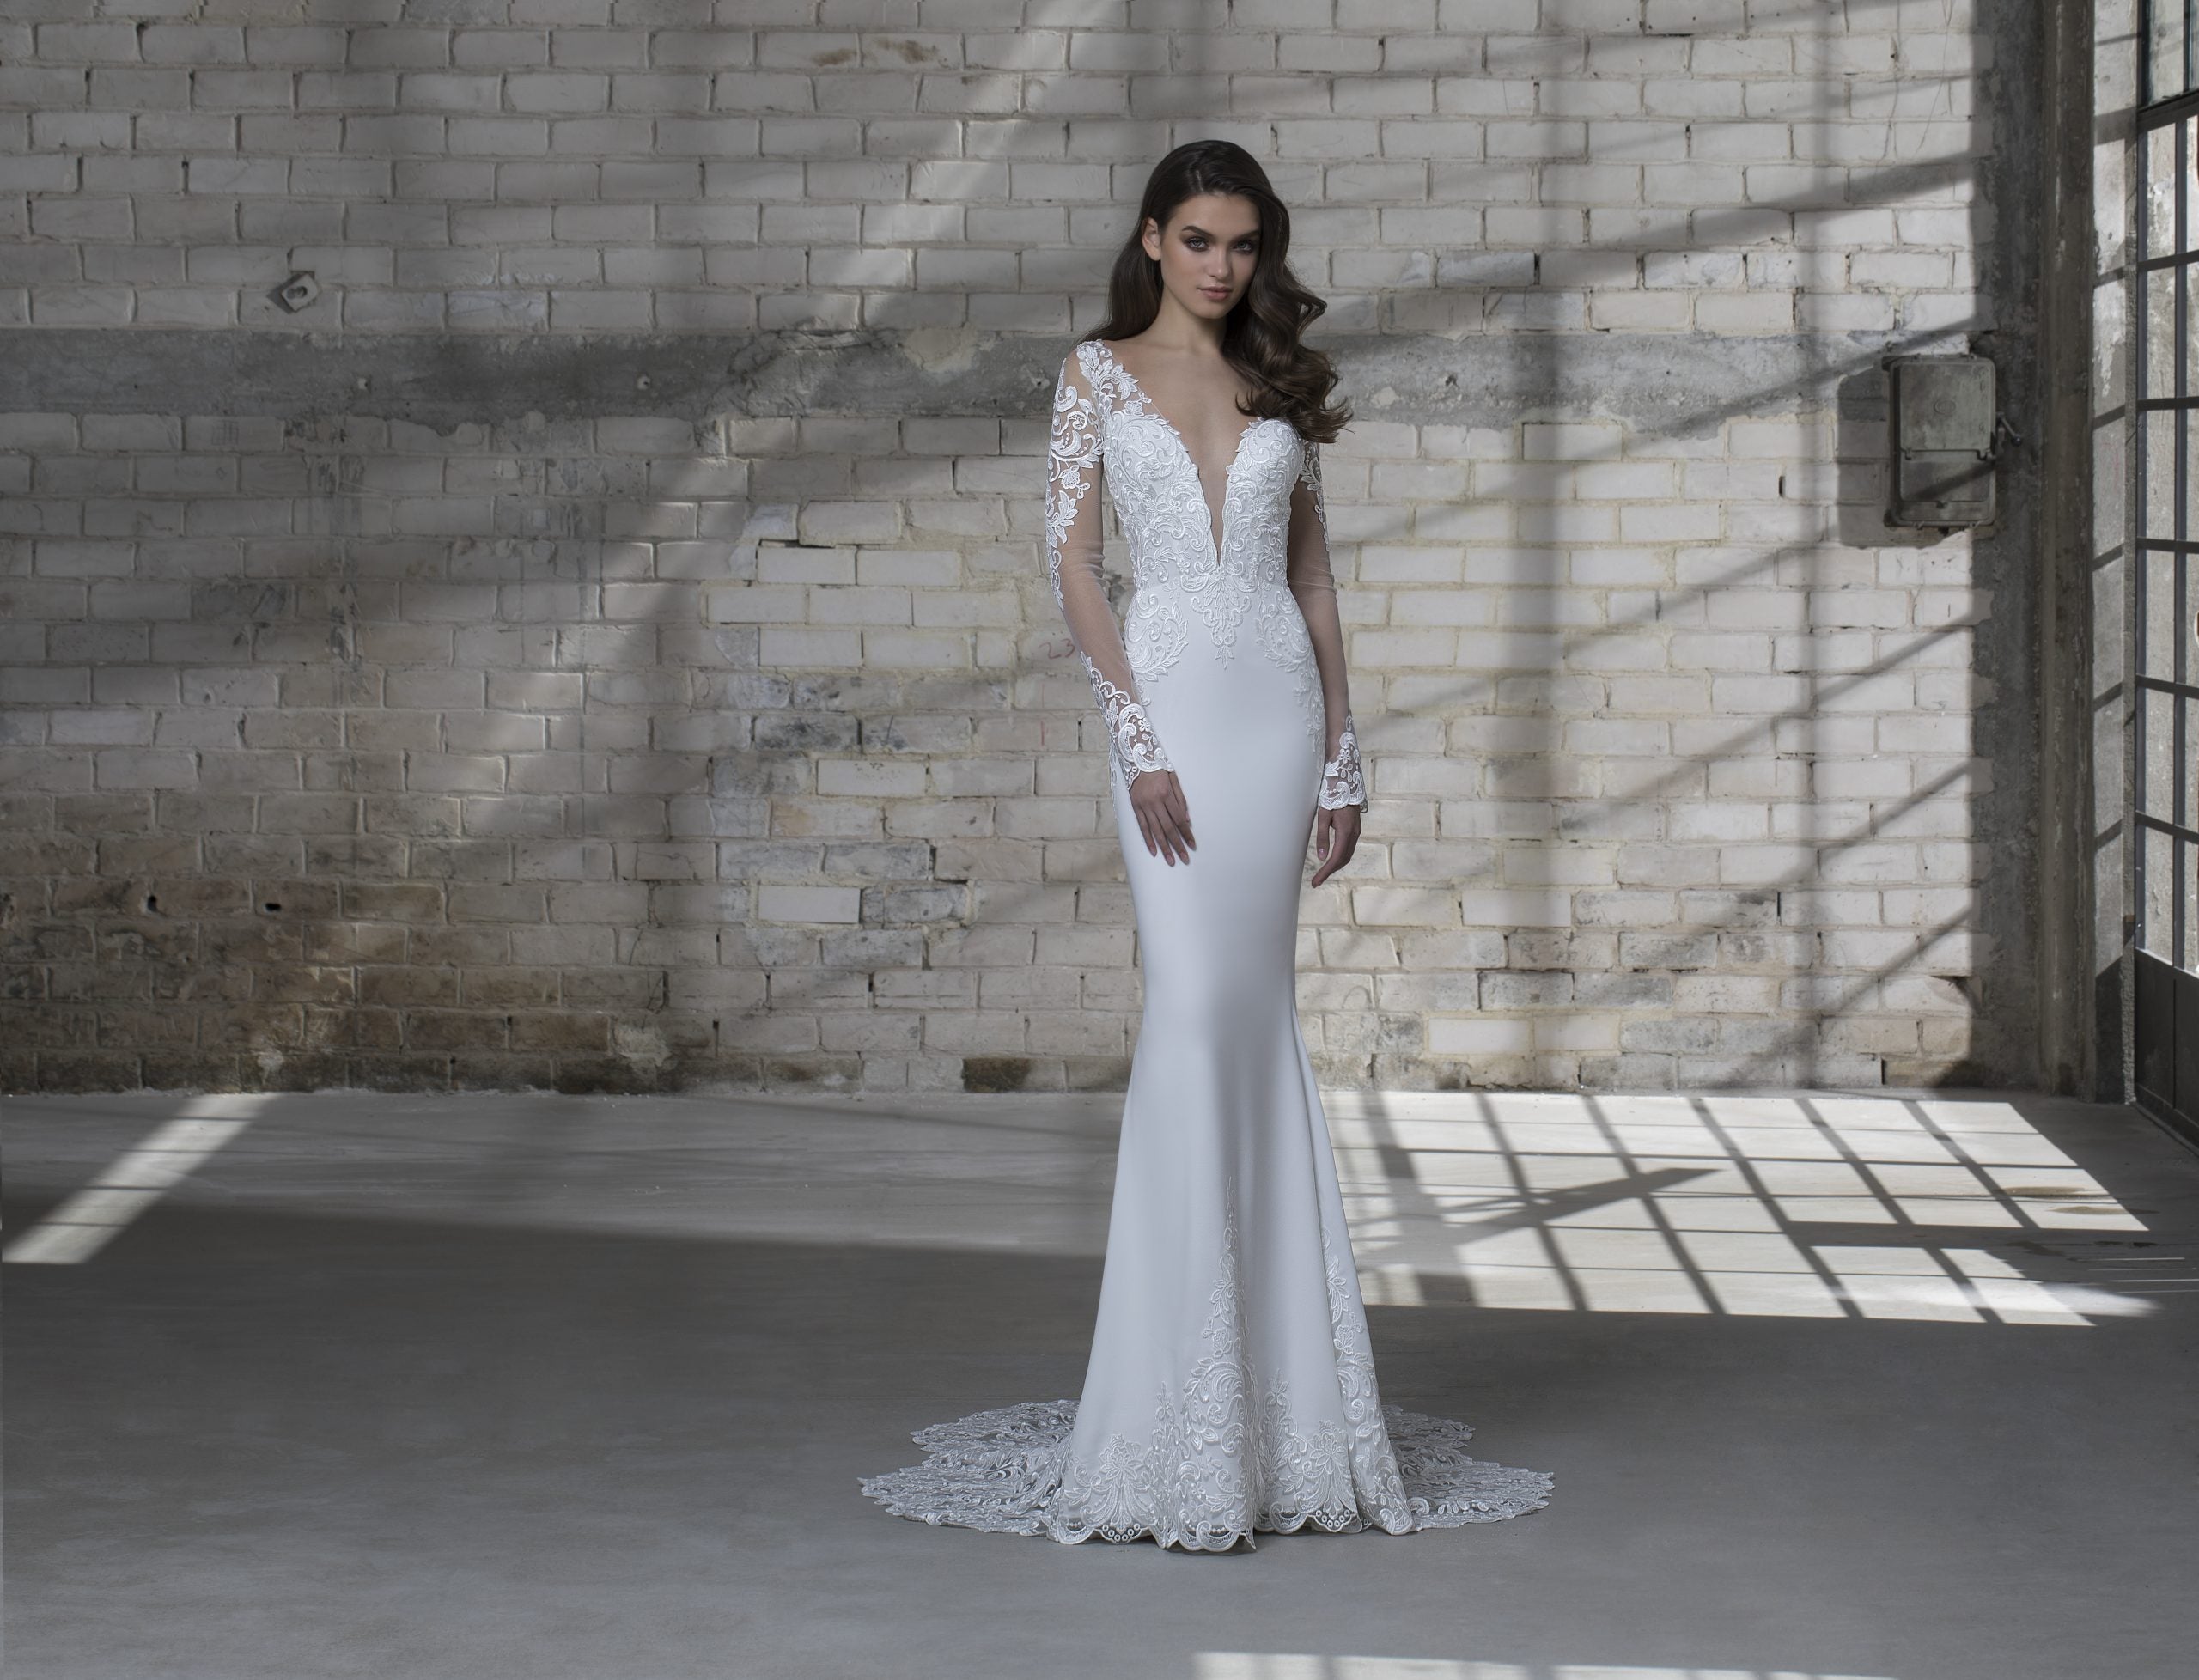 lace sheath wedding dress with removable overskirt